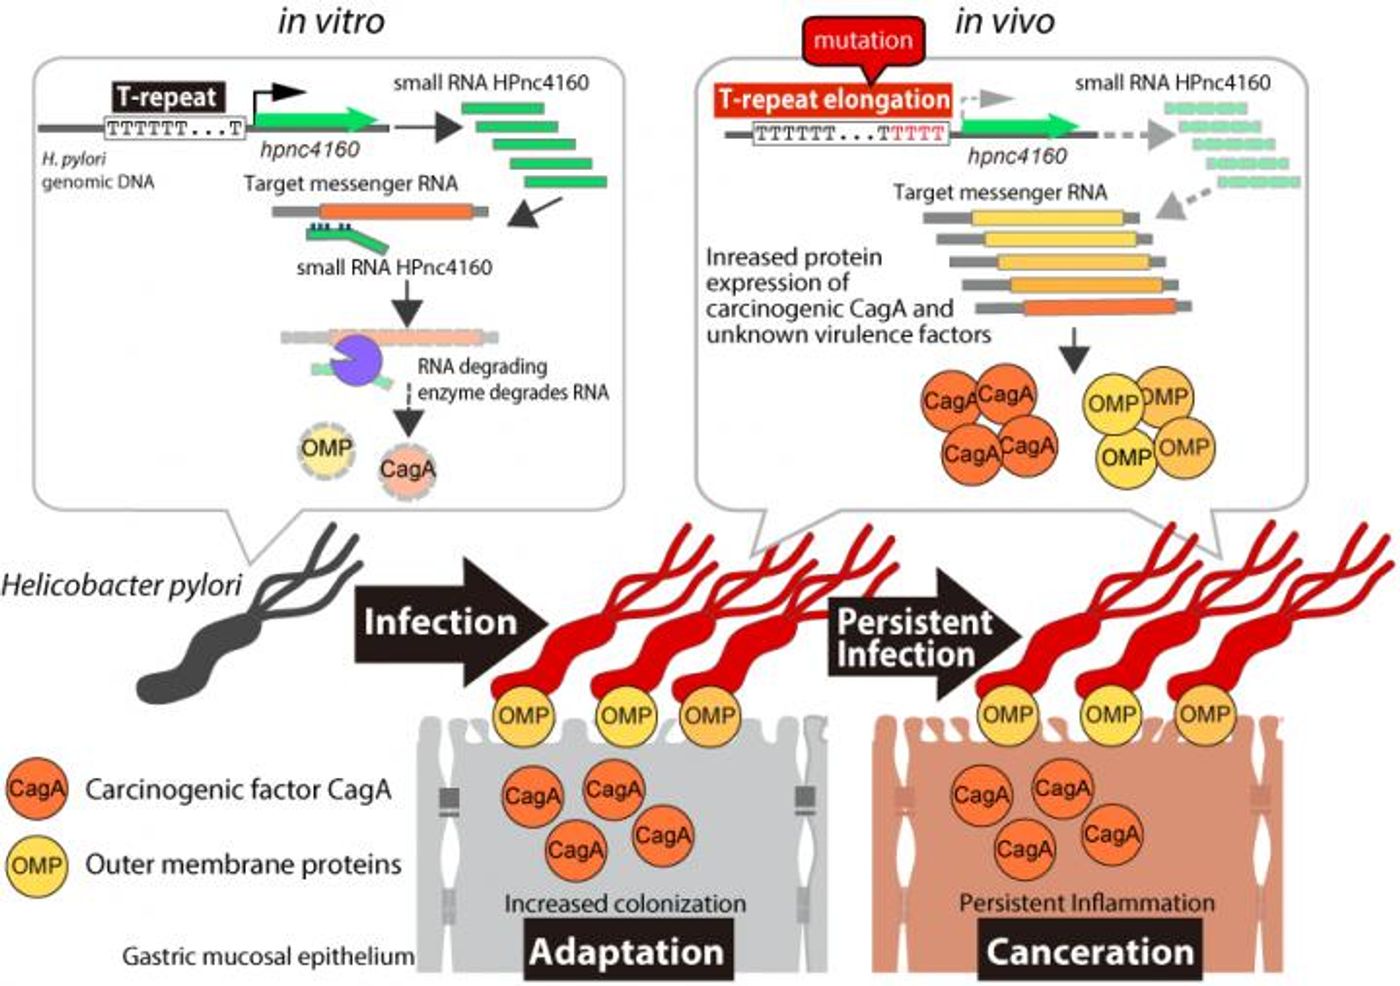 Persistent infection and, potentially, cancer development are regulated by H. pylori small RNA HPnc4160. Gastric mucosa-infecting H. pylori carry a mutation in a T-repeat sequence upstream of the HPnc4160 gene. As HPnc4160 then decreases, pathogenic factors increase, enabling to H. pylori to easily infect the gastric mucosa for a long period of time. / Image credit: Osaka University